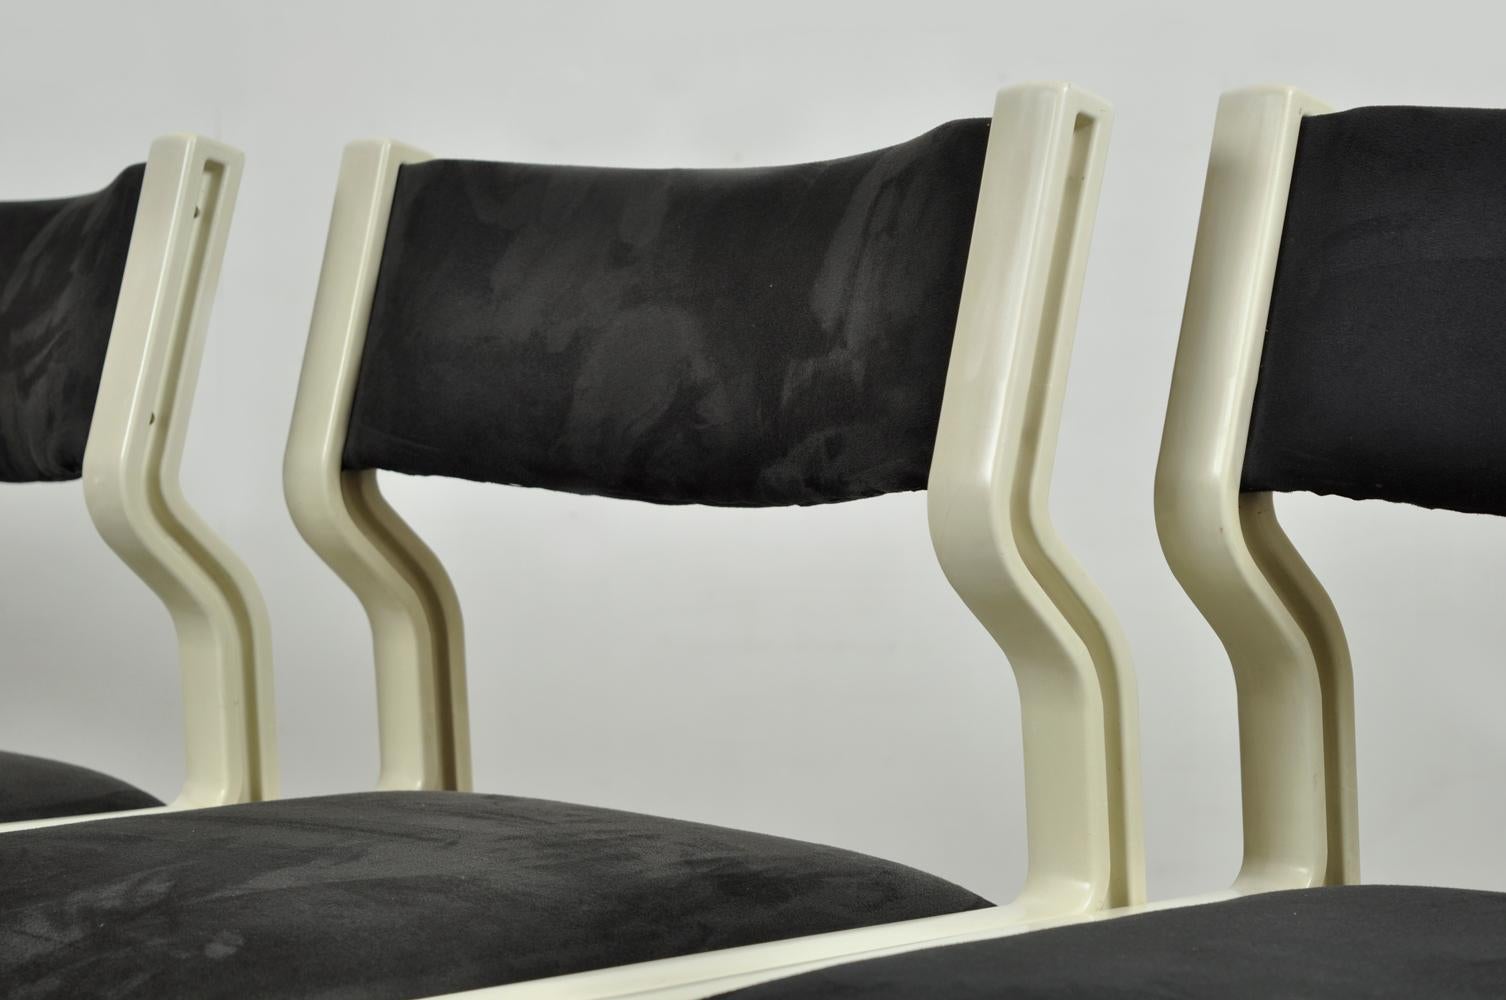 Set of 4 experimental dining chairs by Pierre Mennen for Pastoe, 1972 Netherland In Good Condition For Sale In Denventer, NL